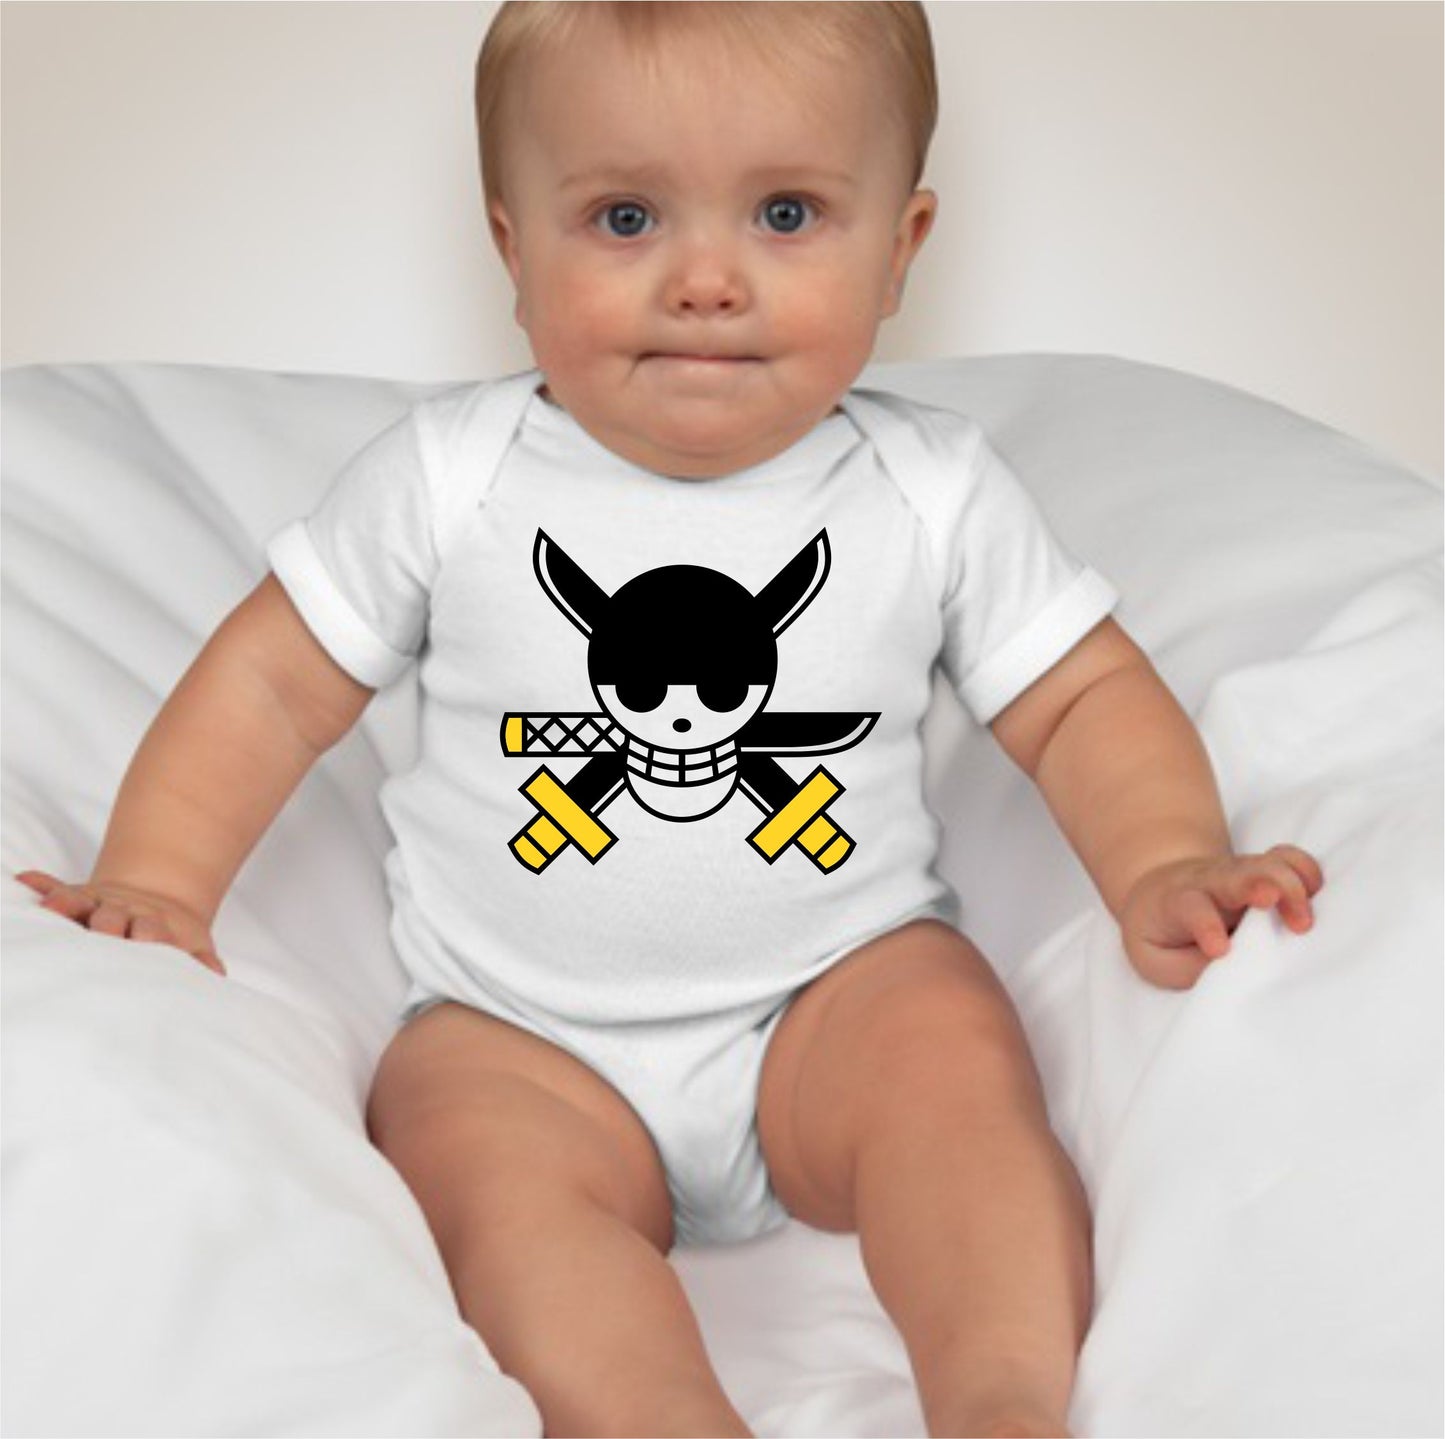 Baby Character Onesies - Jolly Roger One Piece Zorro